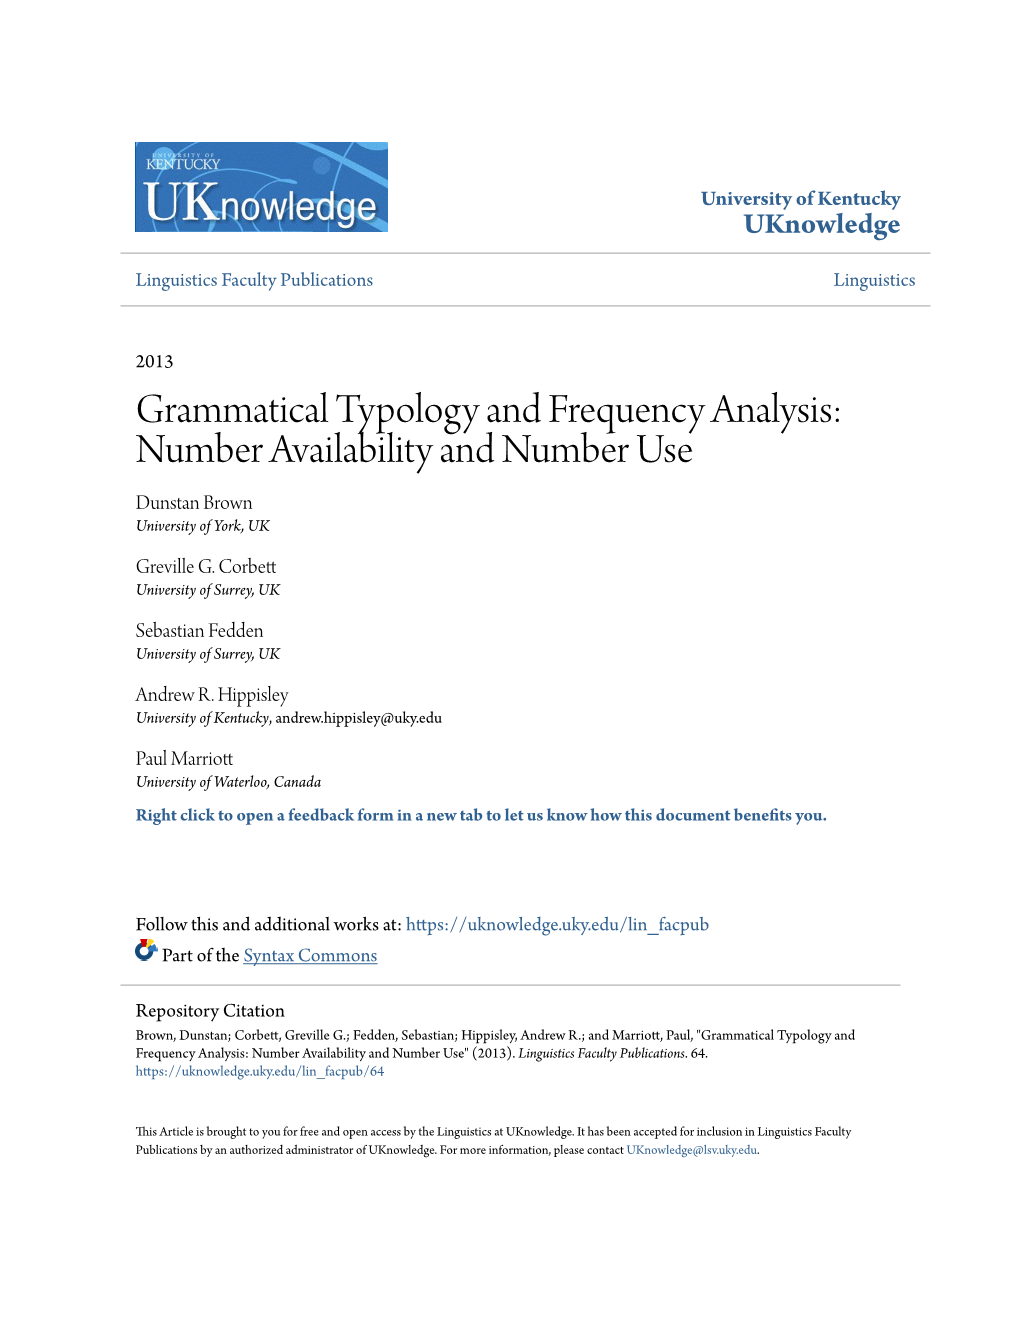 Grammatical Typology and Frequency Analysis: Number Availability and Number Use Dunstan Brown University of York, UK